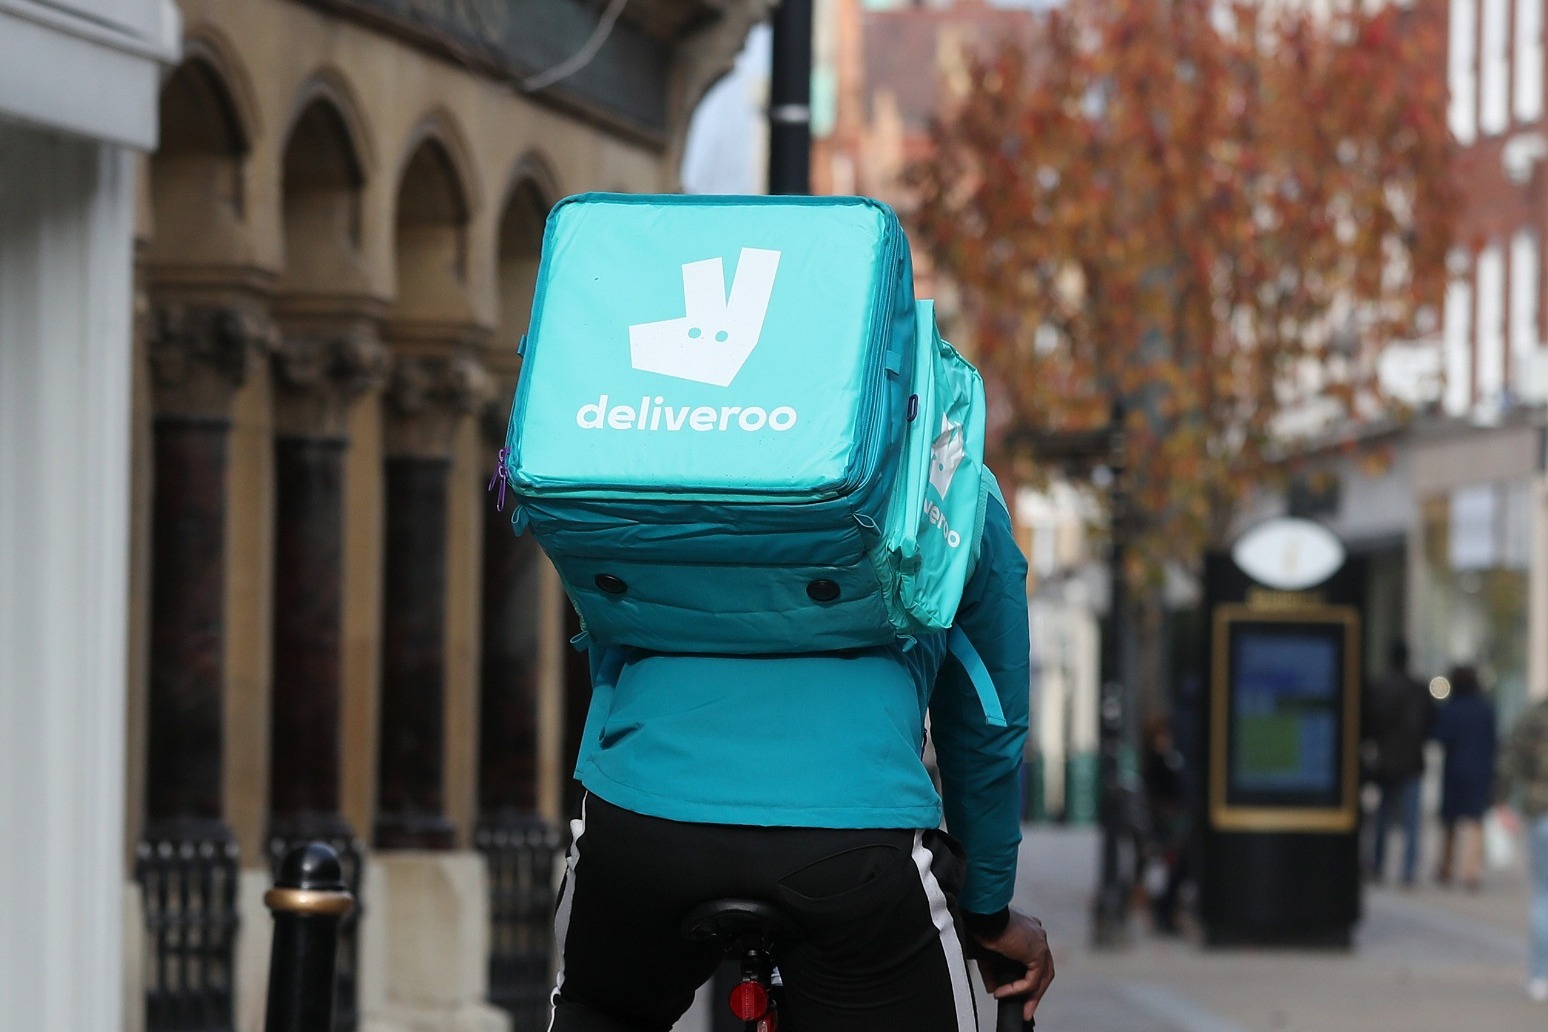 Plumber found guilty of road rage murder of Deliveroo driver 